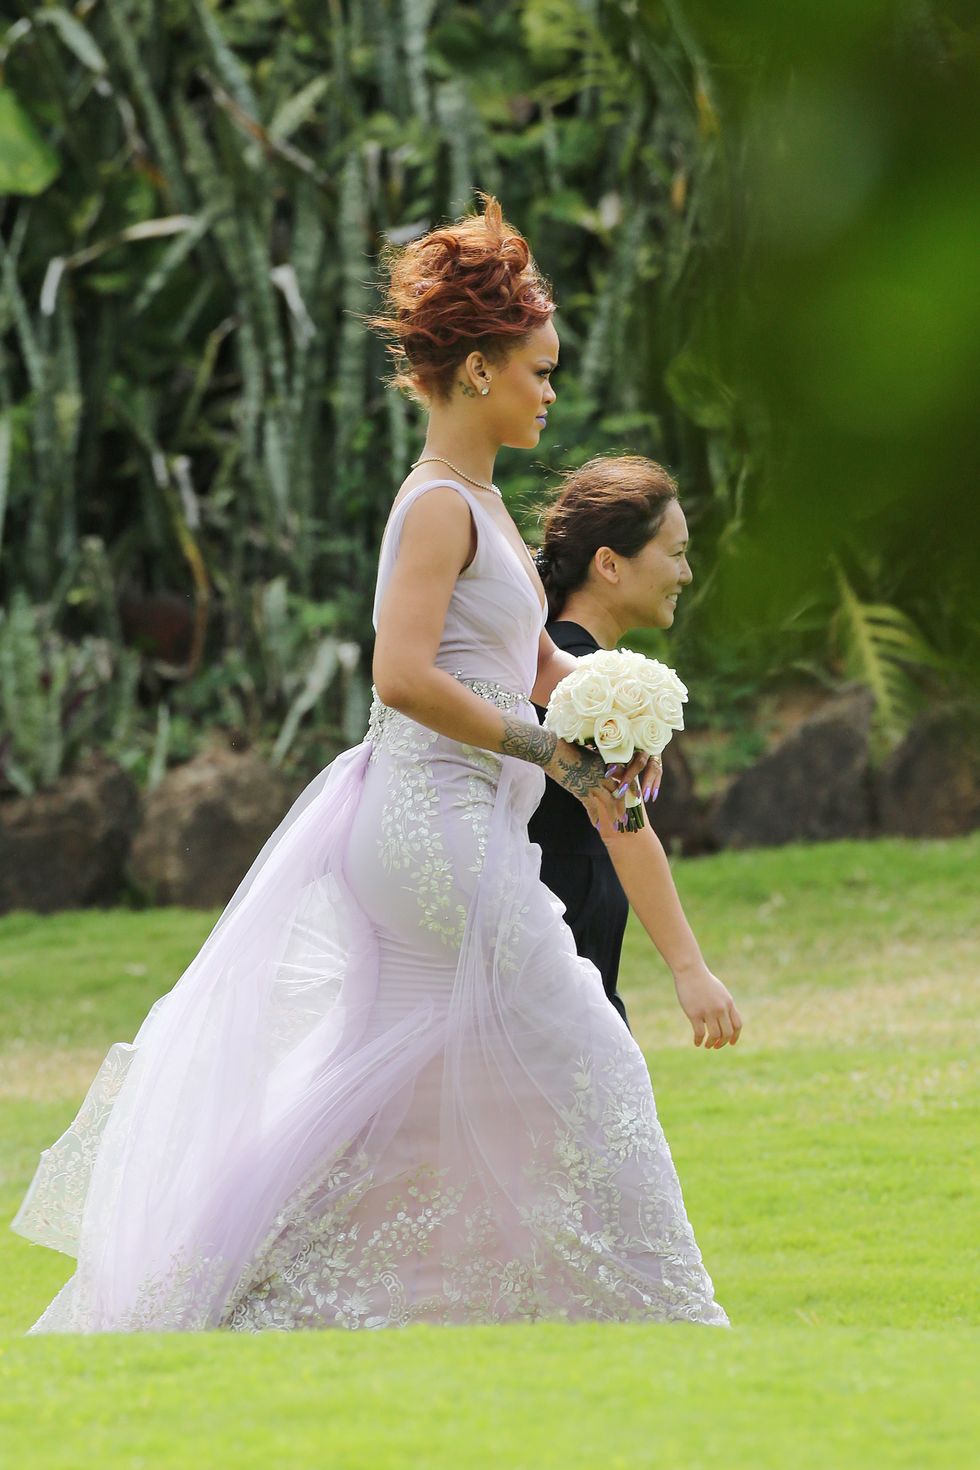 Rihanna at her assistant's wedding